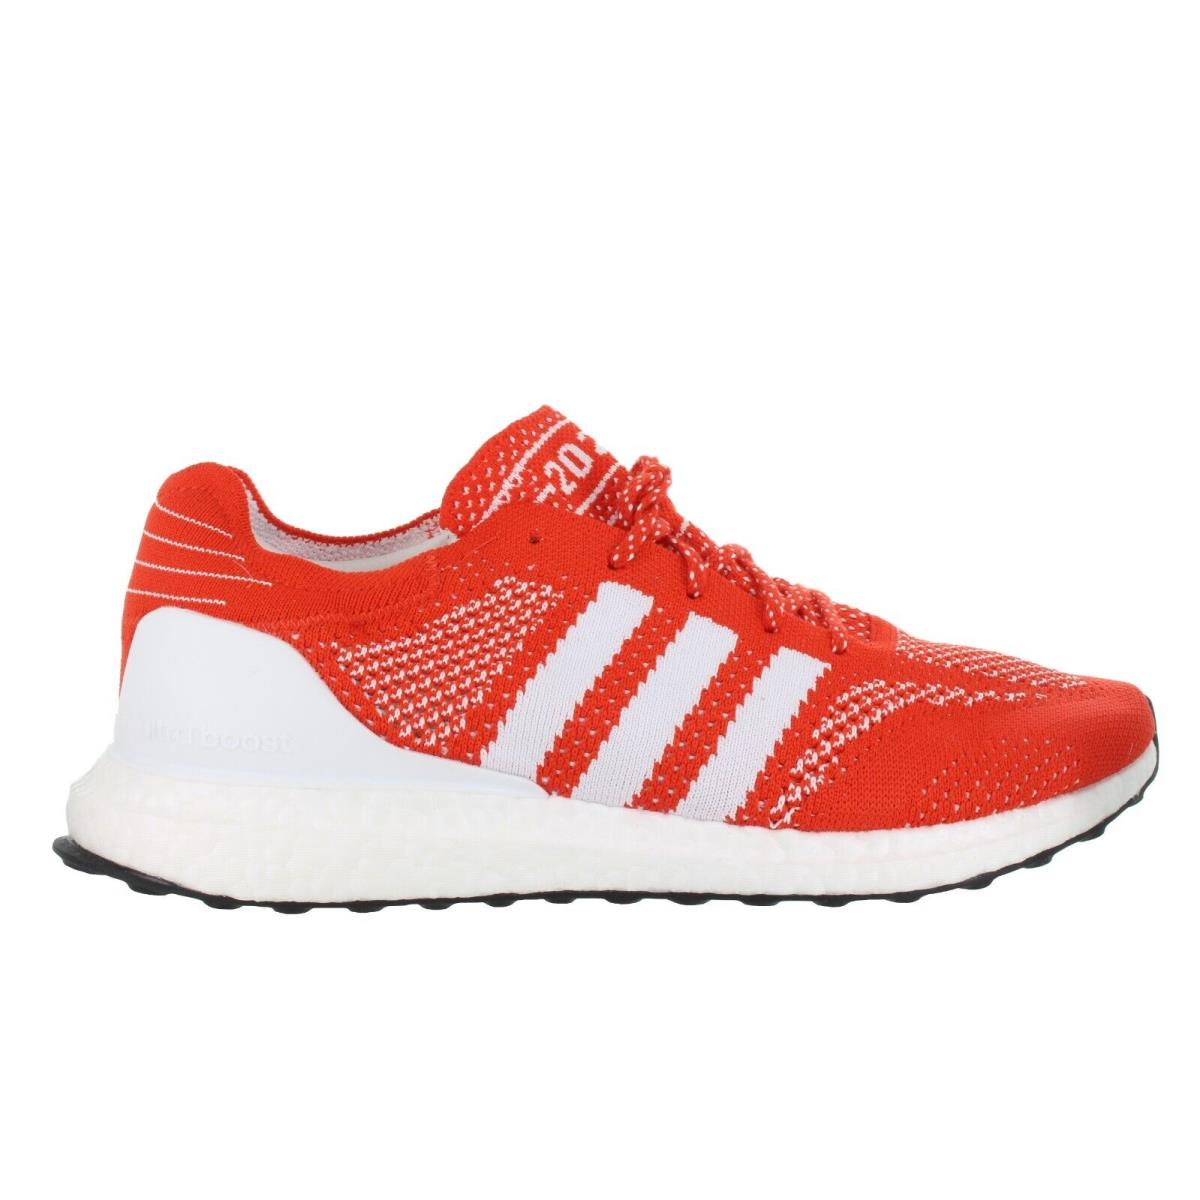 Adidas Men`s Ultraboost Dna Prime Red - White Running Shoes Multiple Size - Active Red, Cloud White, Core Black